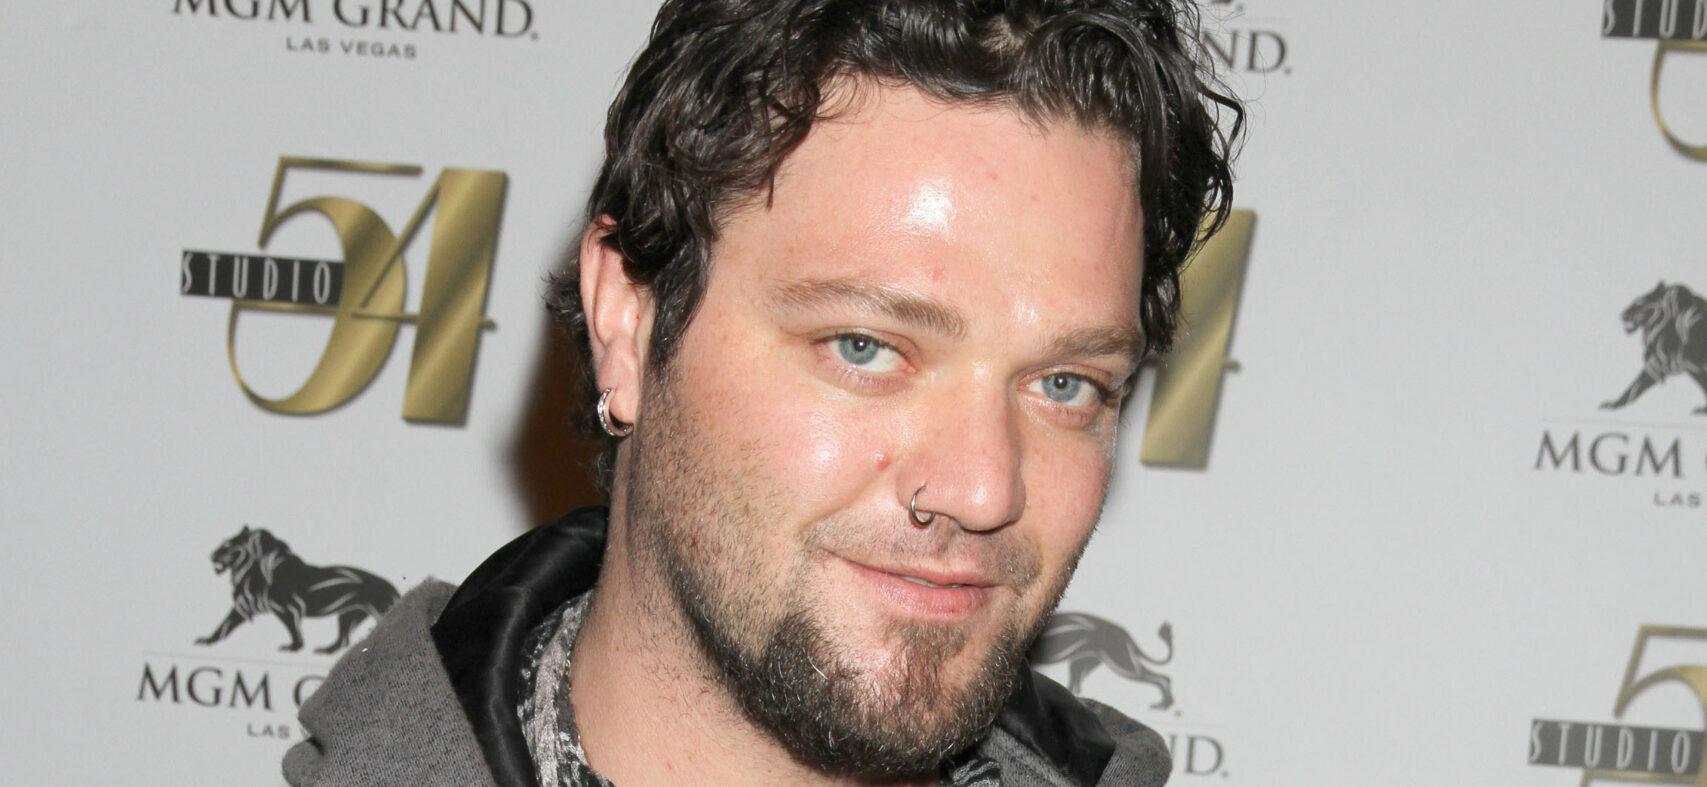 Bam Margera Claims He Was ‘Pronounced Dead’ After Suffering ‘Gnarly COVID’